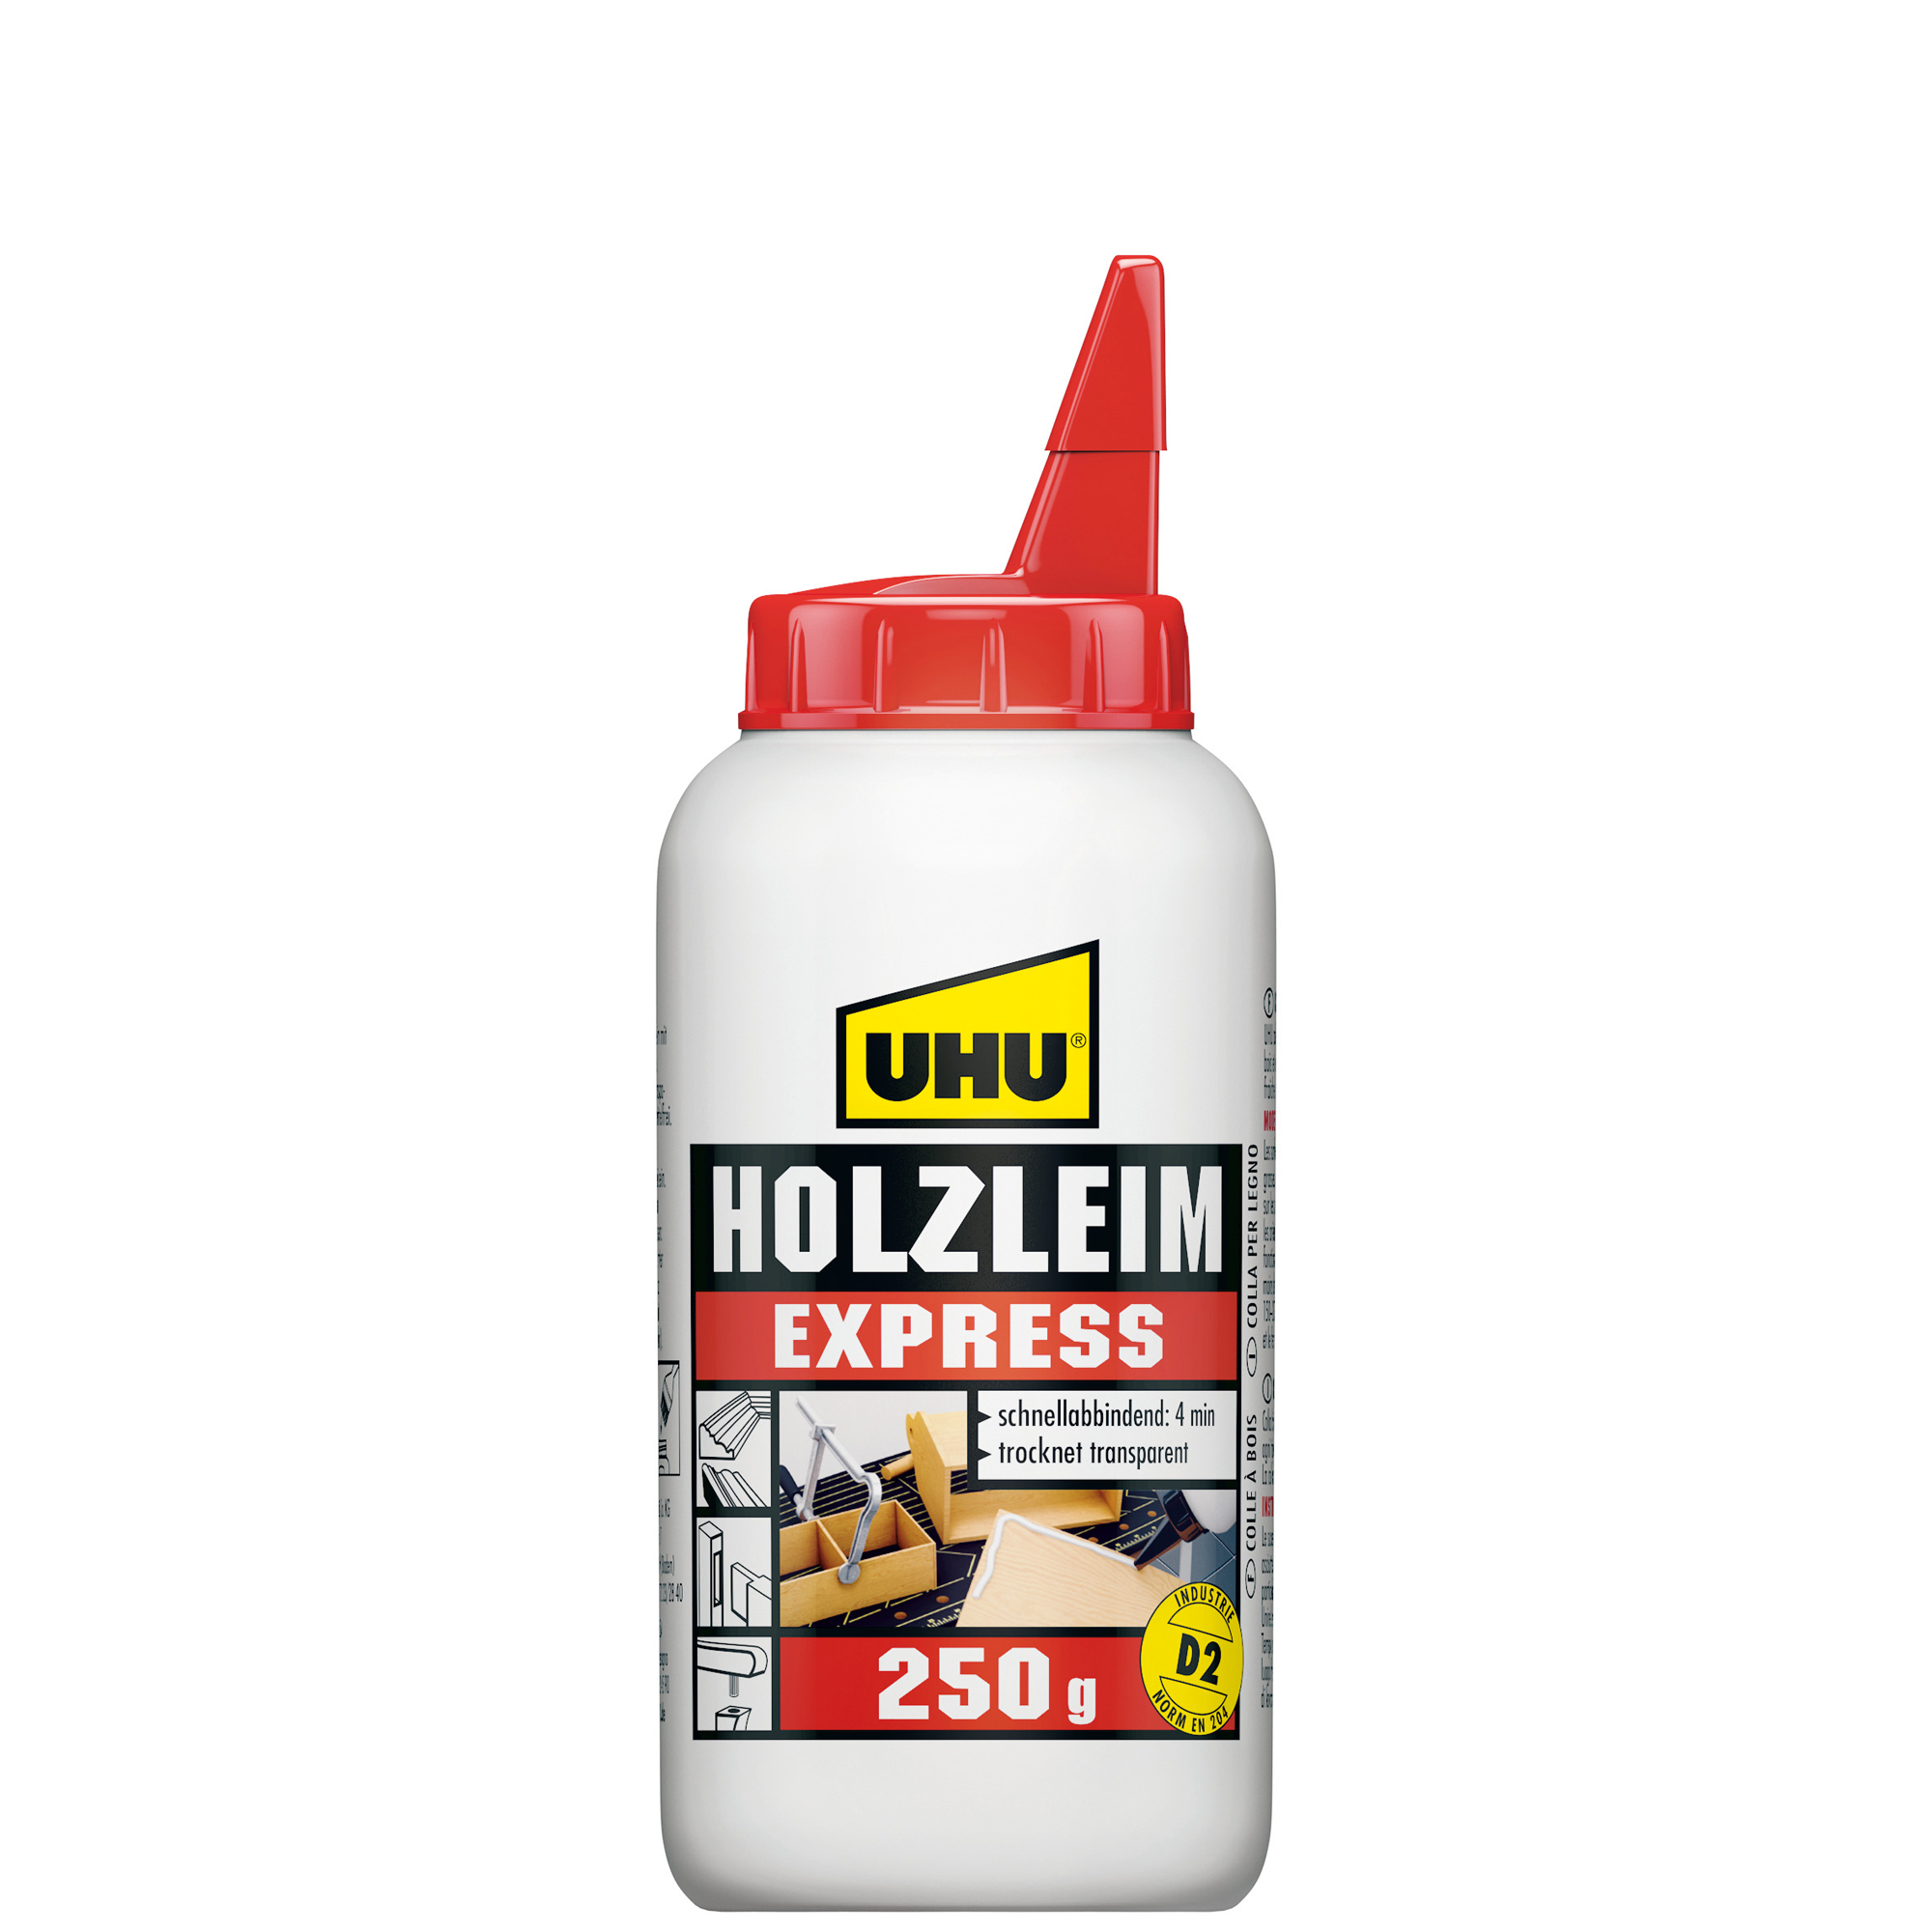 Holzleim 'Express' 250 g + product picture